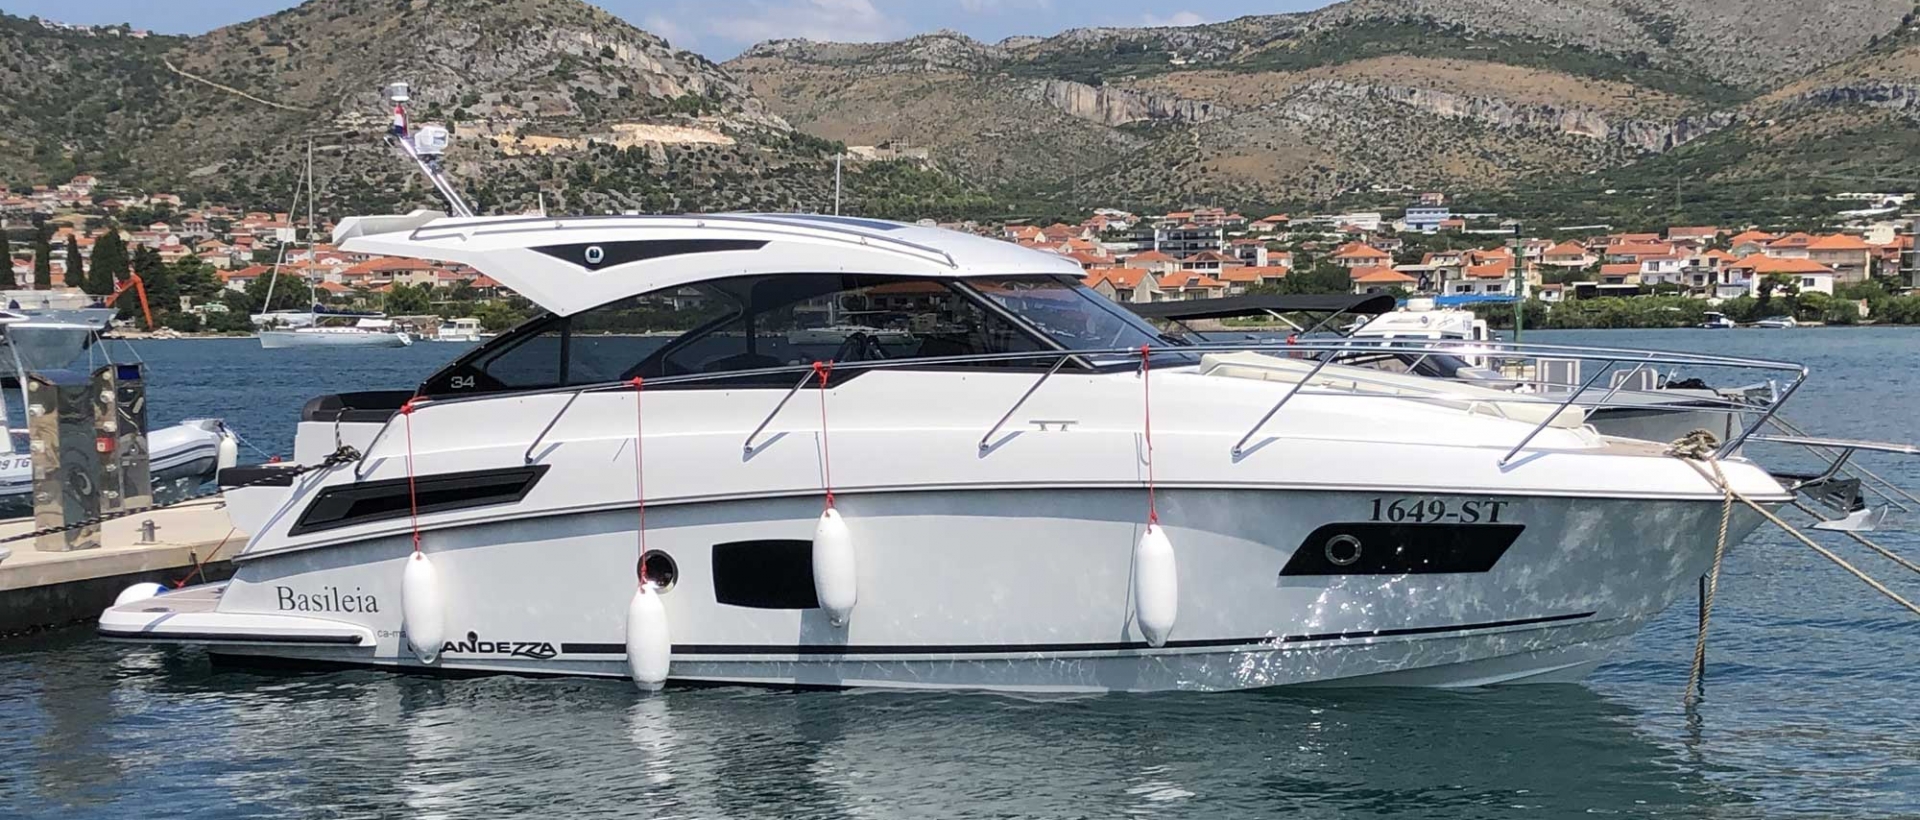 Grandezza 34 Oc Best Motor Yacht For Cruise Up To 35 Feet Rent